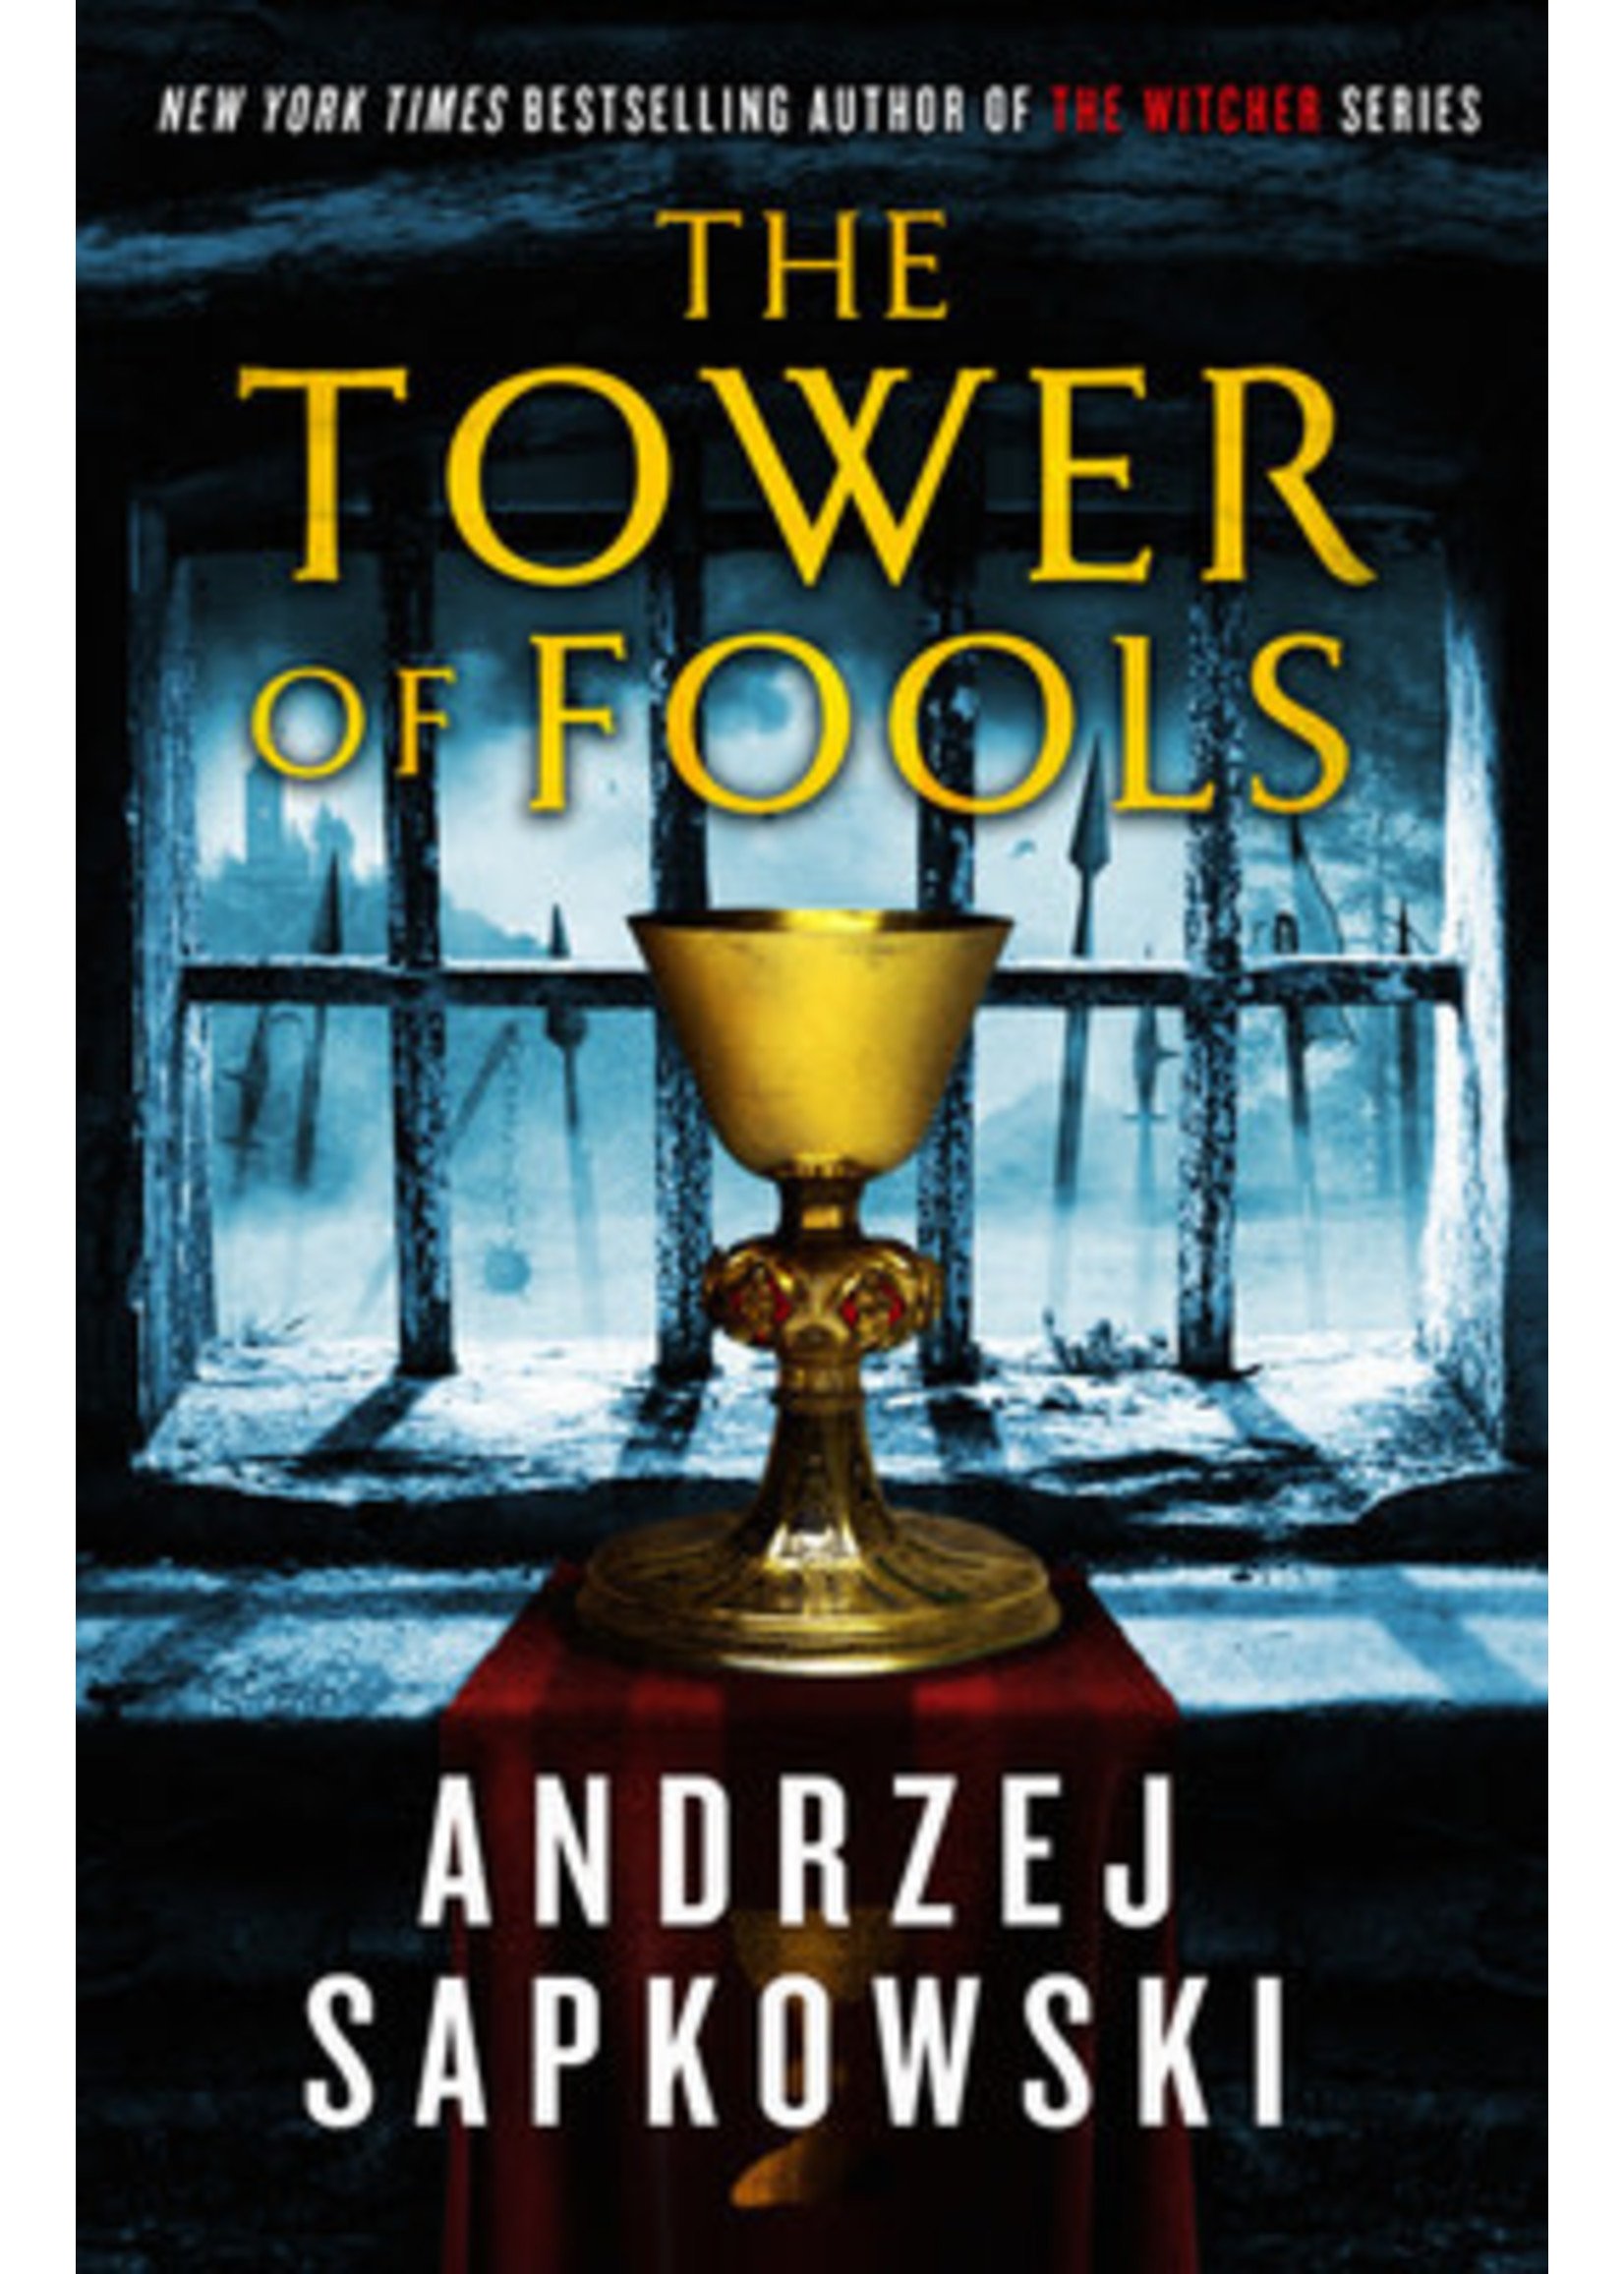 The Tower of Fools (Hussite Trilogy #1) by Andrzej Sapkowski,  David French